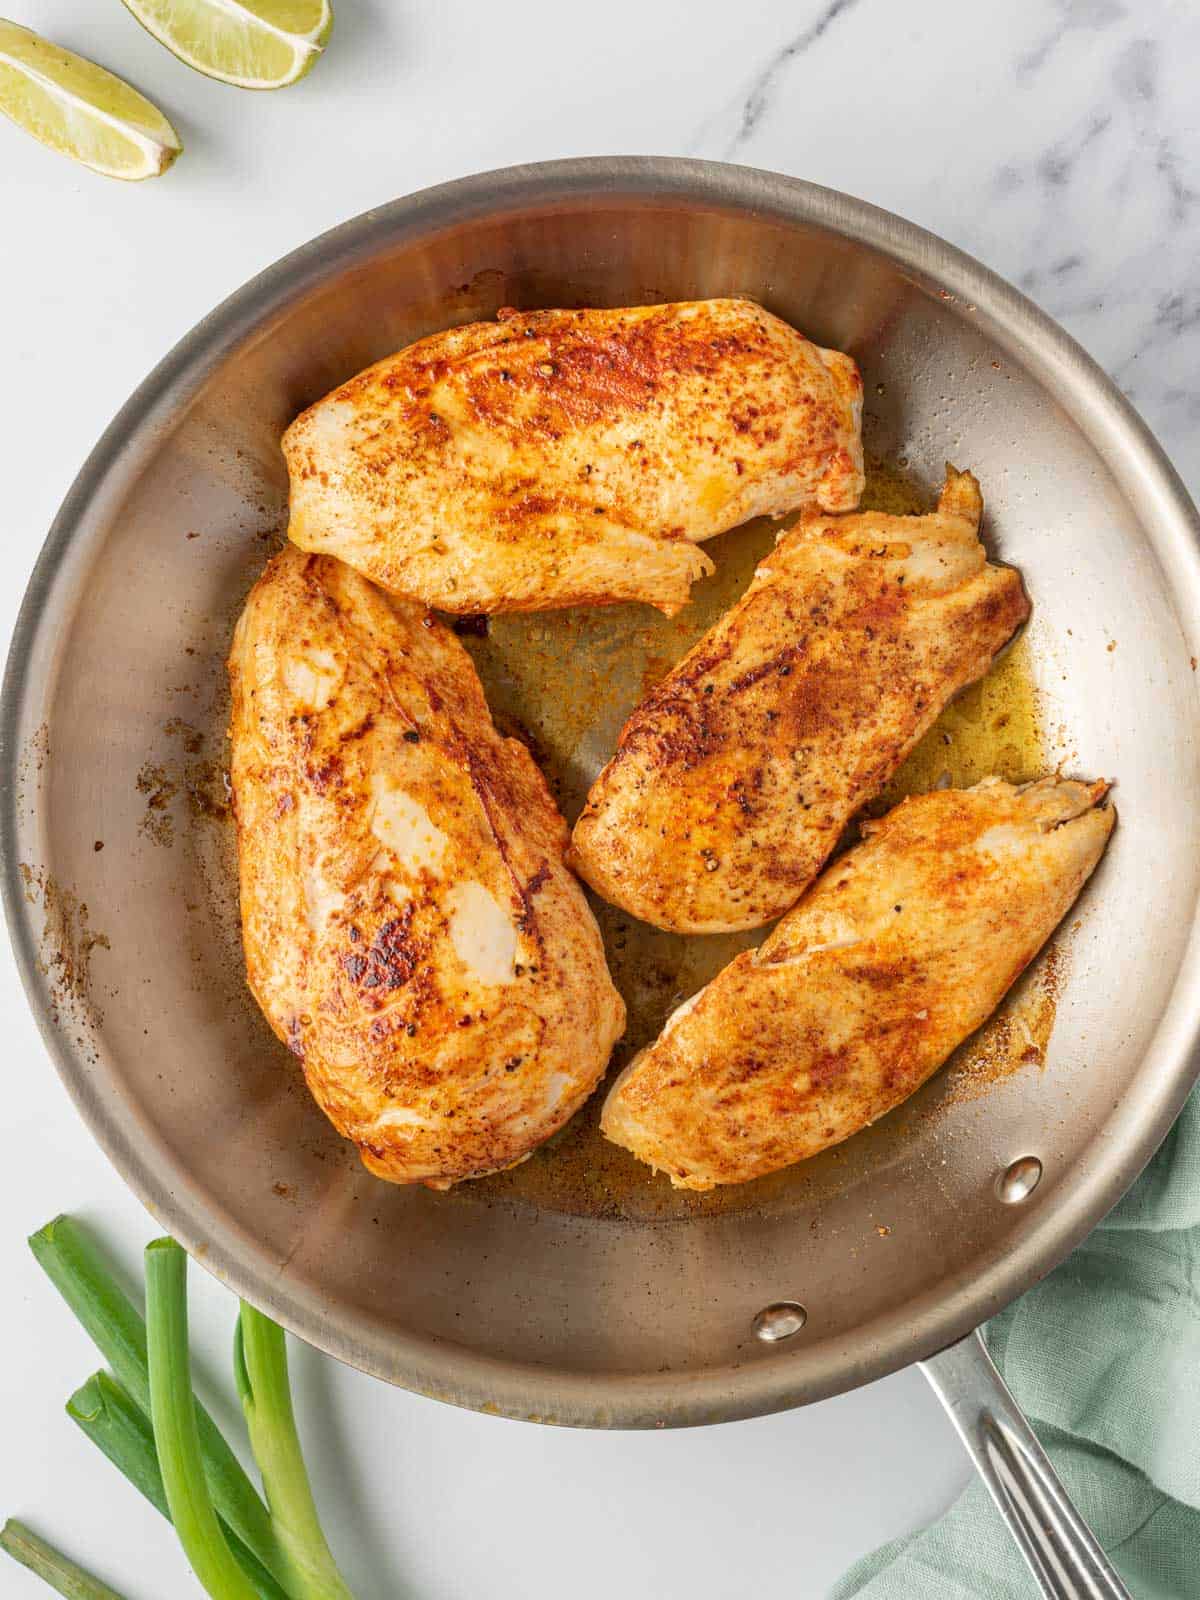 Searing the spicy chicken breast recipe in a skillet.